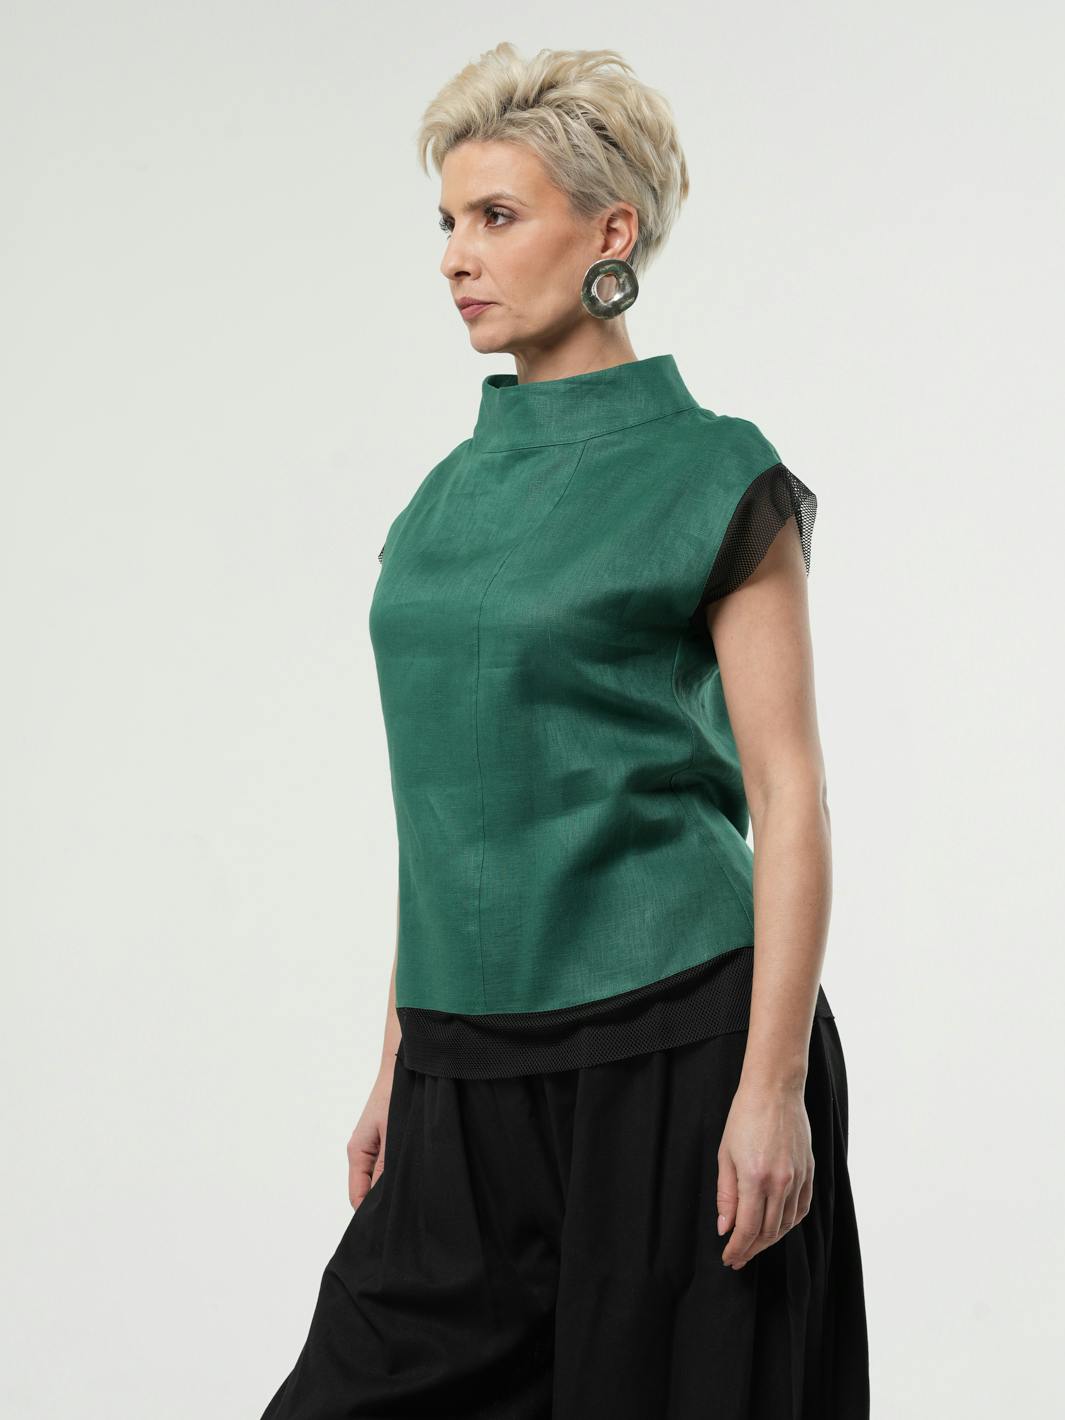 Turtleneck Linen Top With Mesh Details, a product by METAMORPHOZA